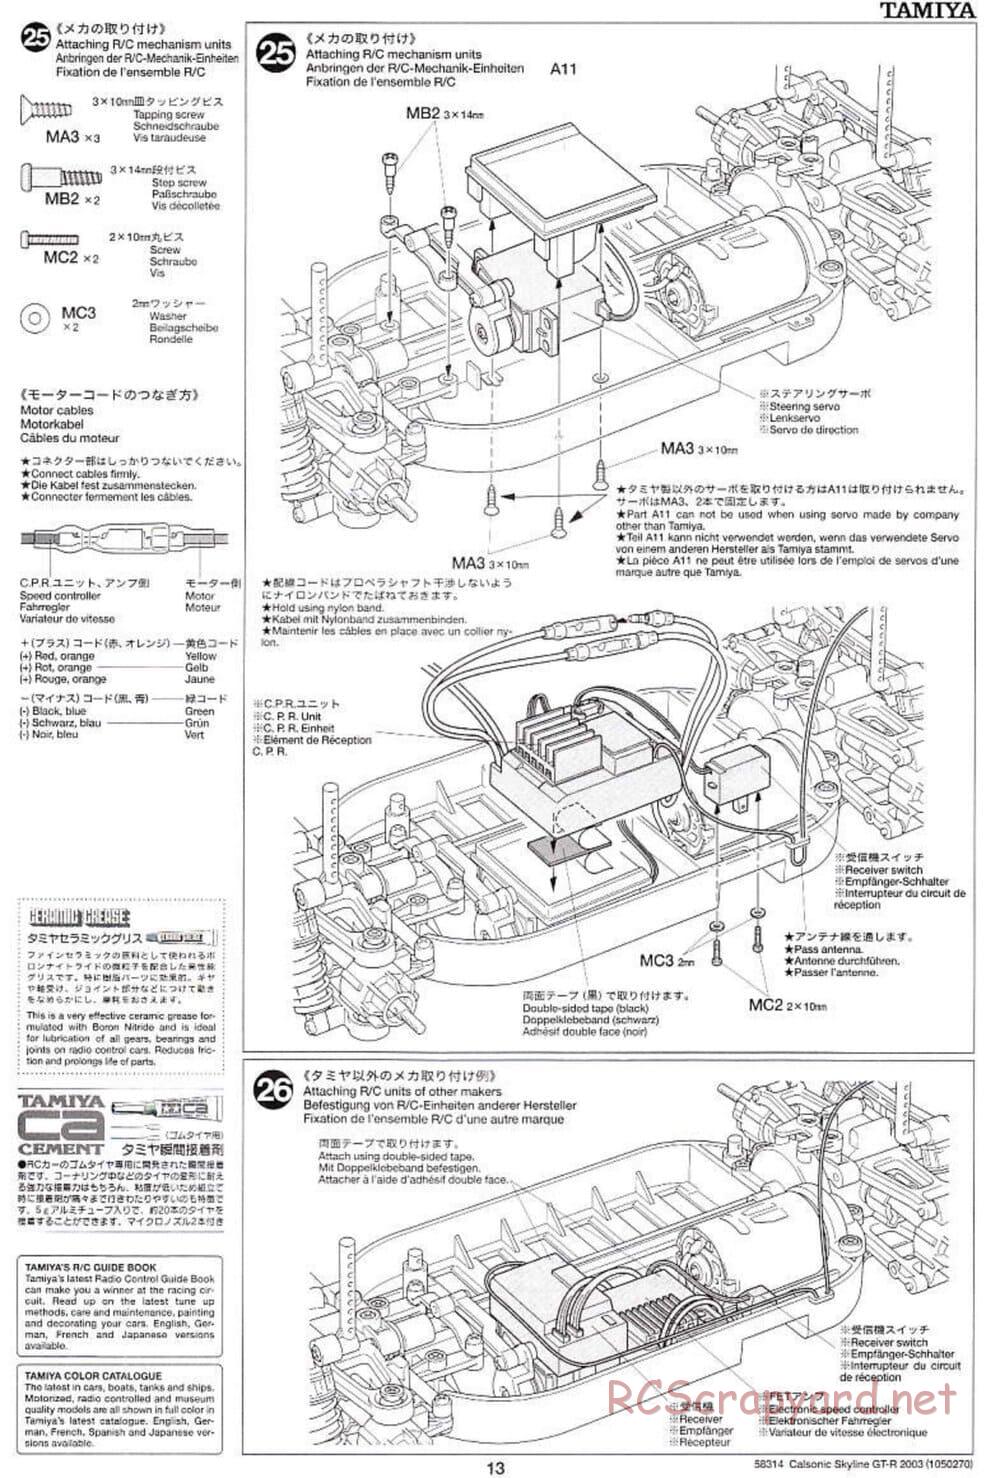 Tamiya - Calsonic Skyline GT-R 2003 - TT-01 Chassis - Manual - Page 13